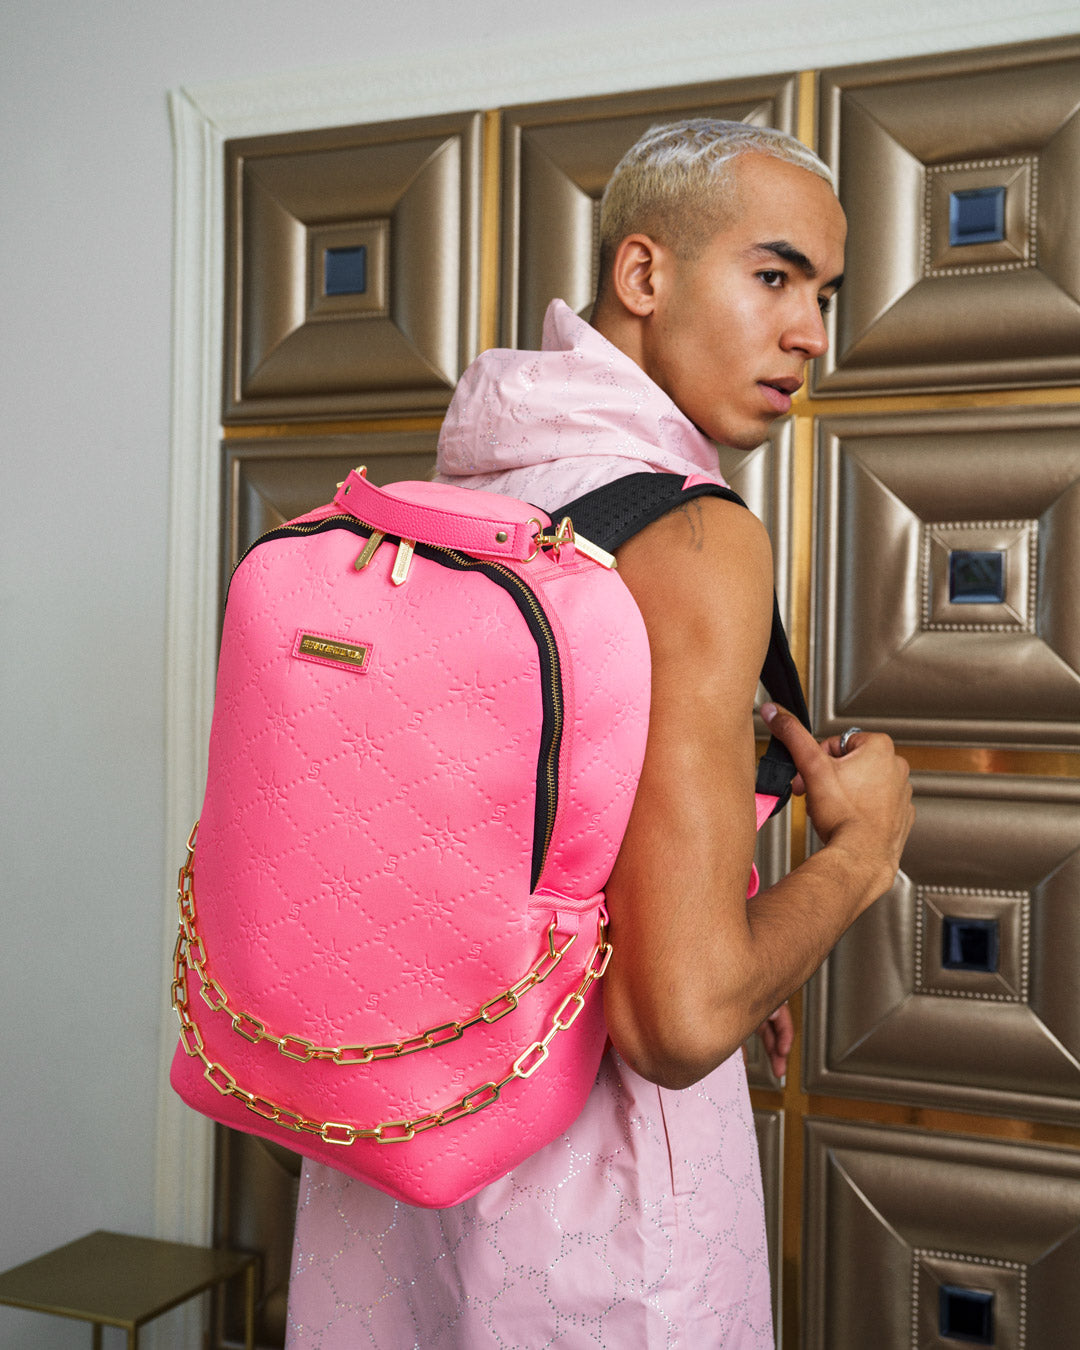 Bags, Pink Fake Leather Mini Backpack With Gold Zippers And Details